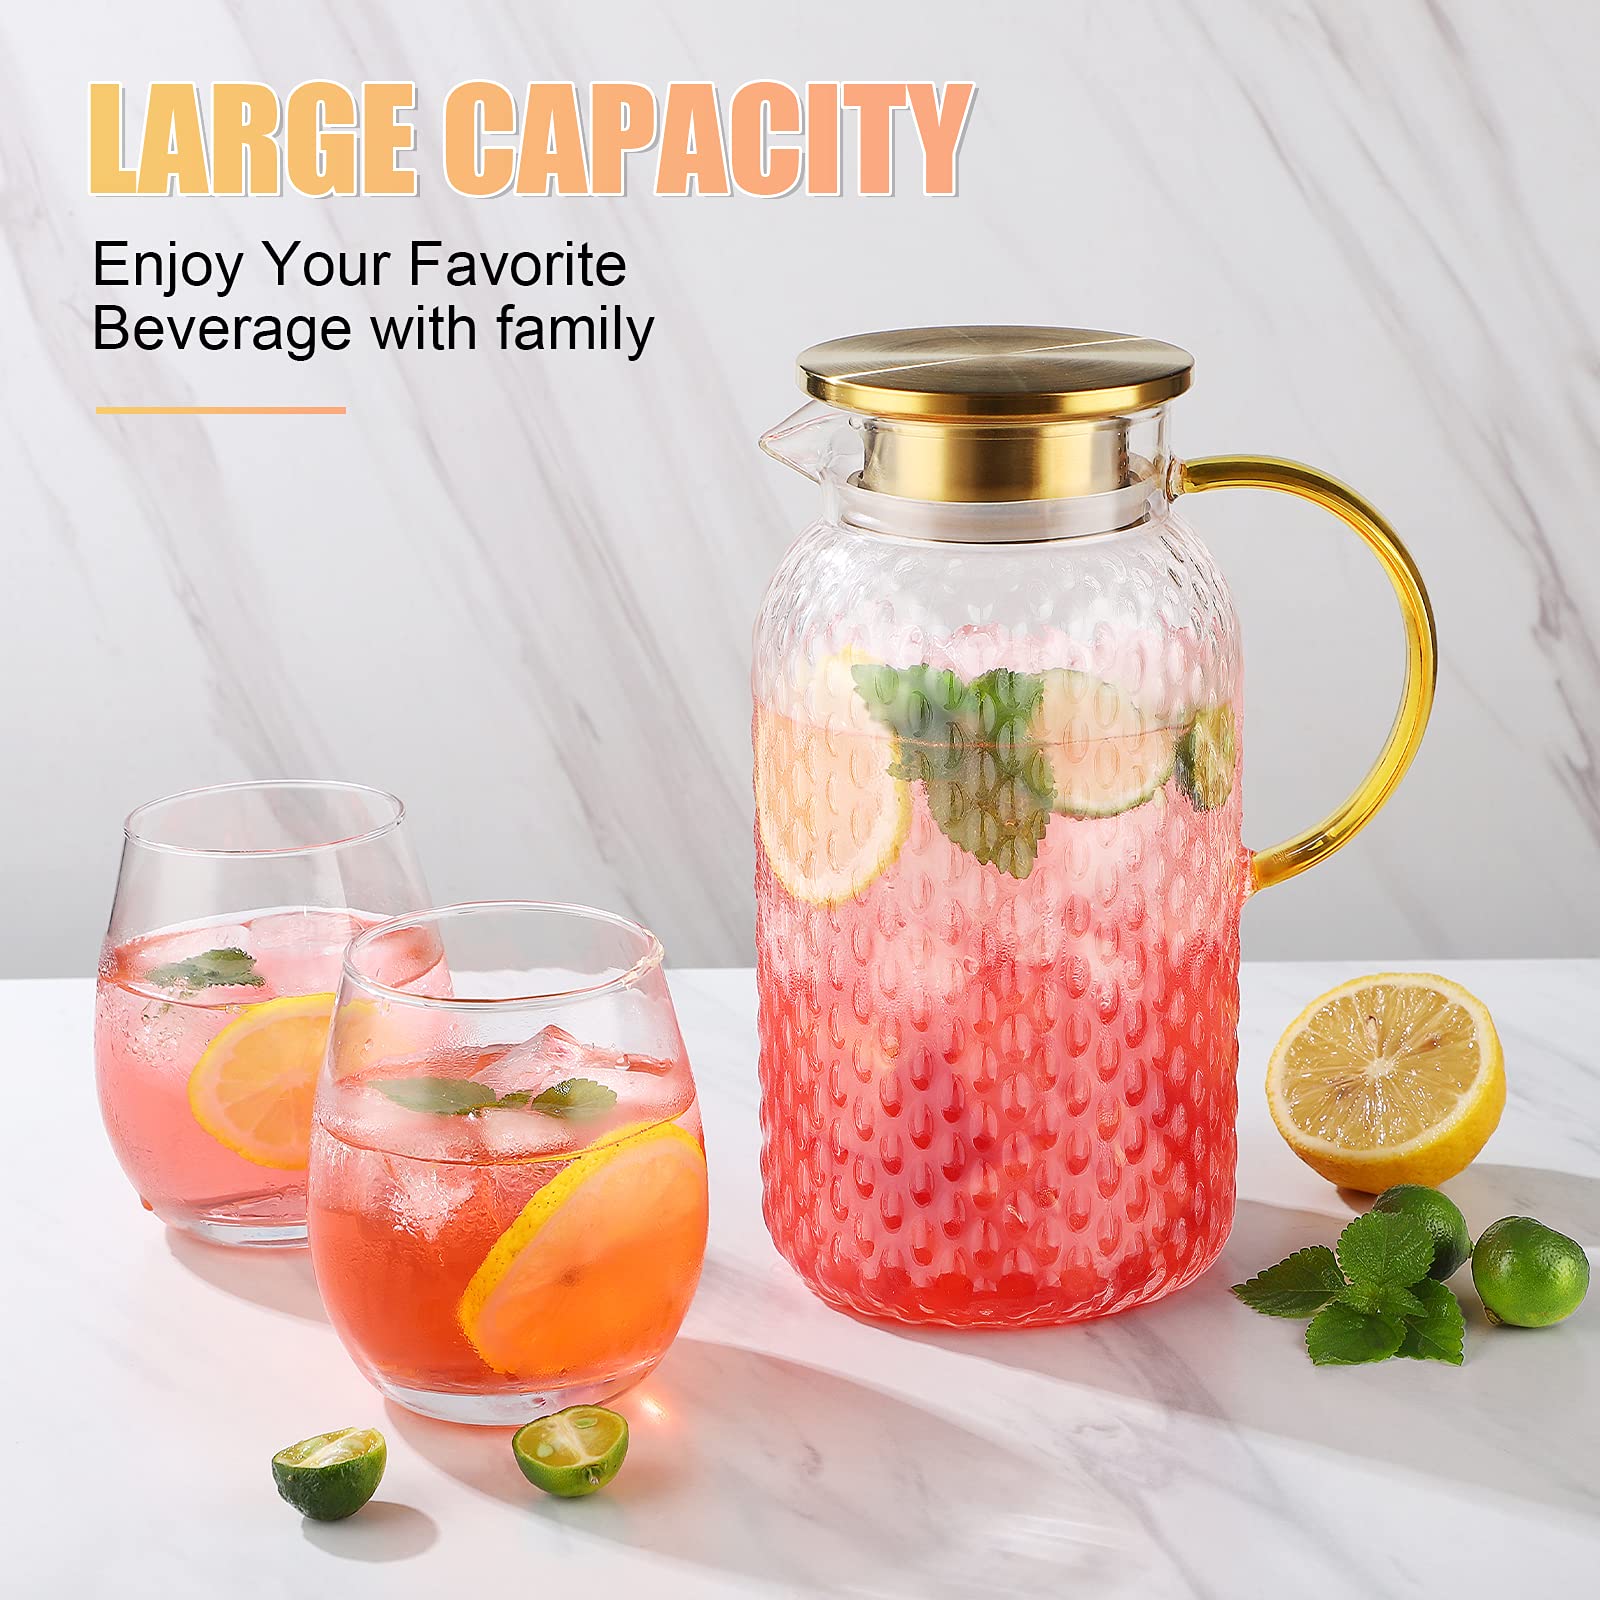 Glass Pitcher - 66 OZ fridge door pitcher Drip-Free Glass Water Pitcher with Lid, 18/8 Stainless Steel Iced Tea Pitcher, Easy Clean Heat Resistance Glass Carafe For Hot/Cold Beverages, Iced Tea, Juice